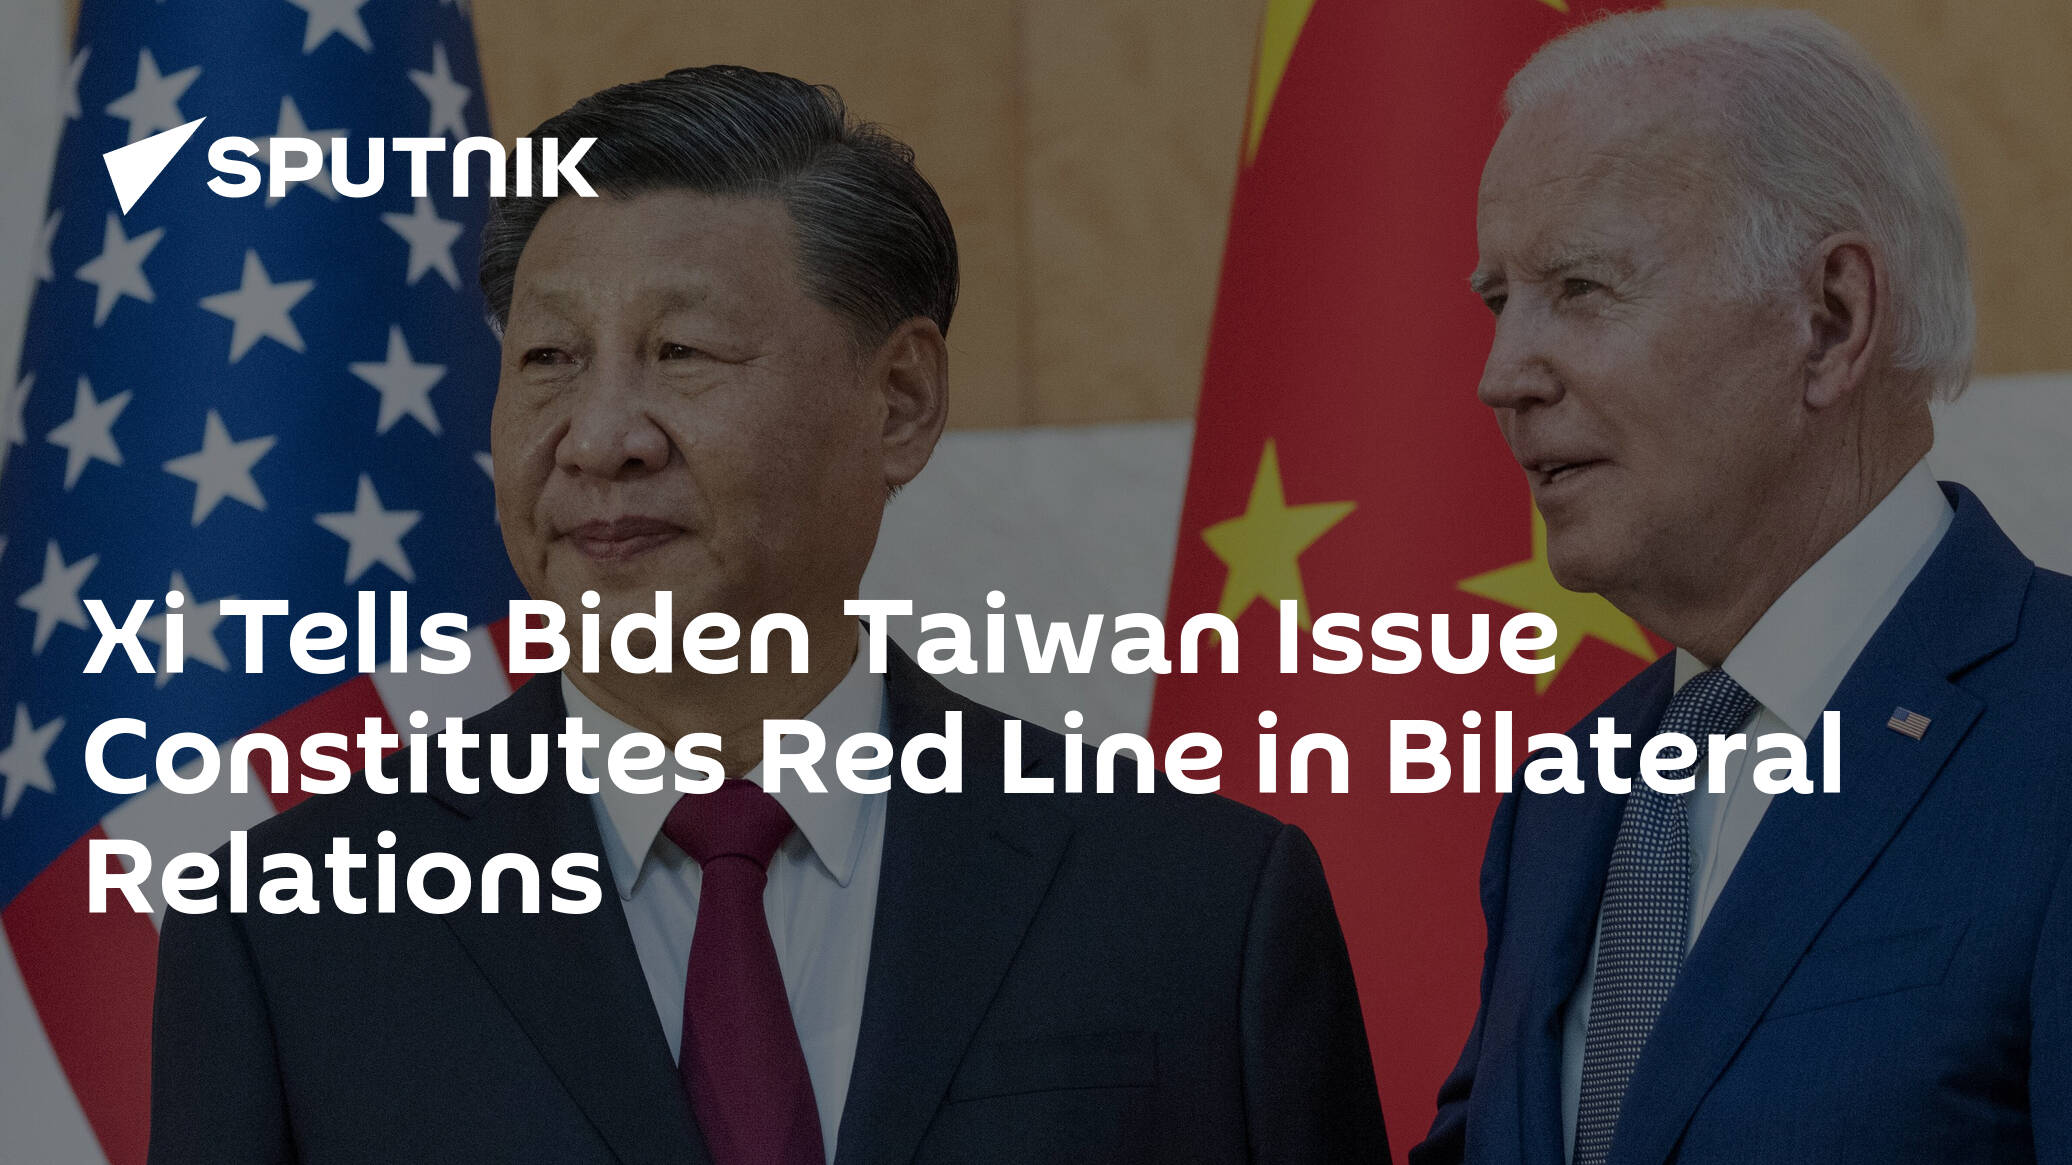 Xi Tells Biden Taiwan Issue Constitutes Red Line in Bilateral Relations